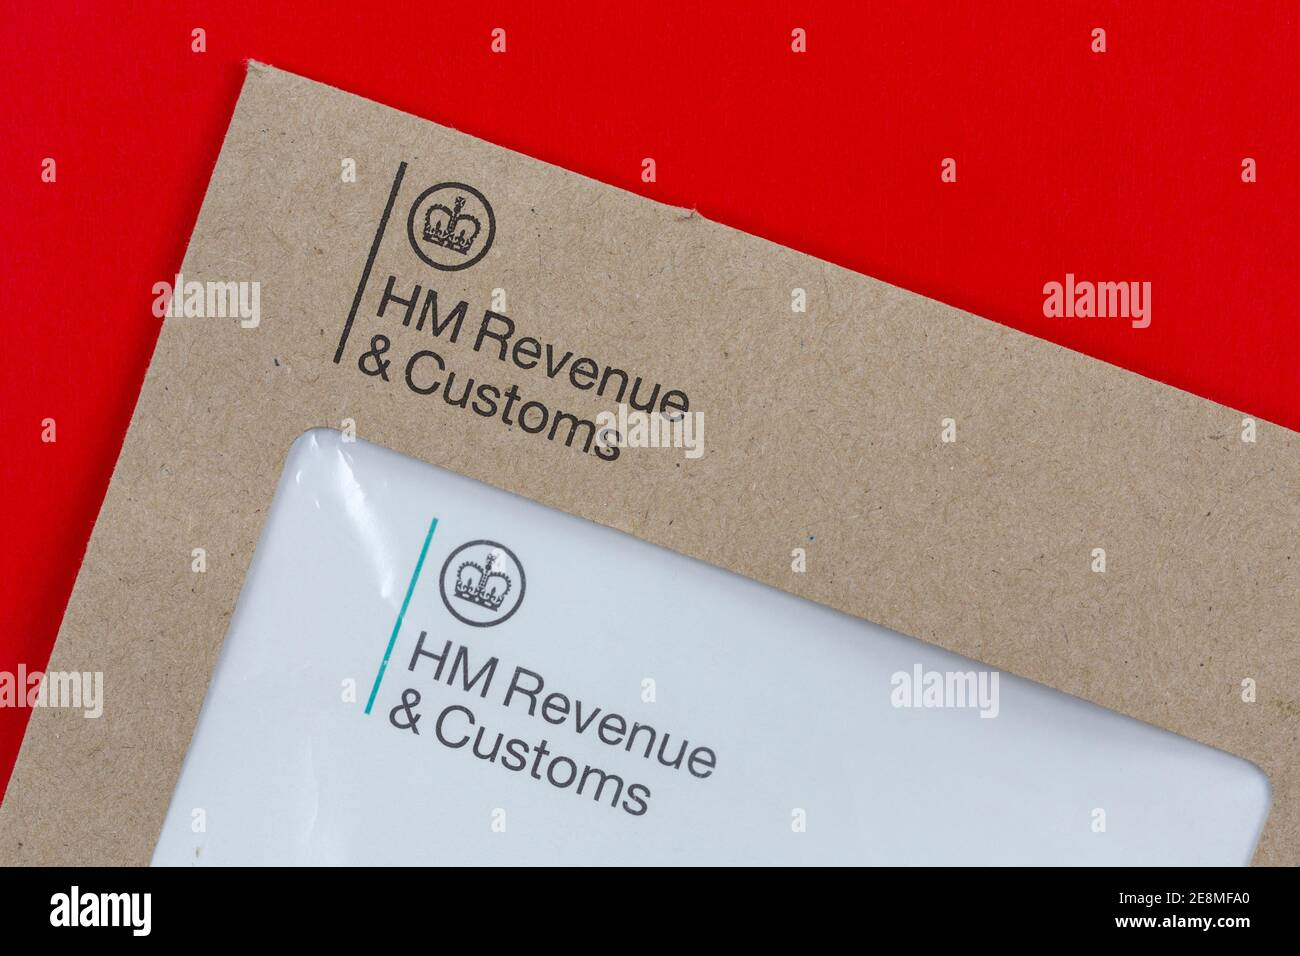 Tax return letter from HMRC, HM Revenue & Customs. UK income tax letter. Stock Photo